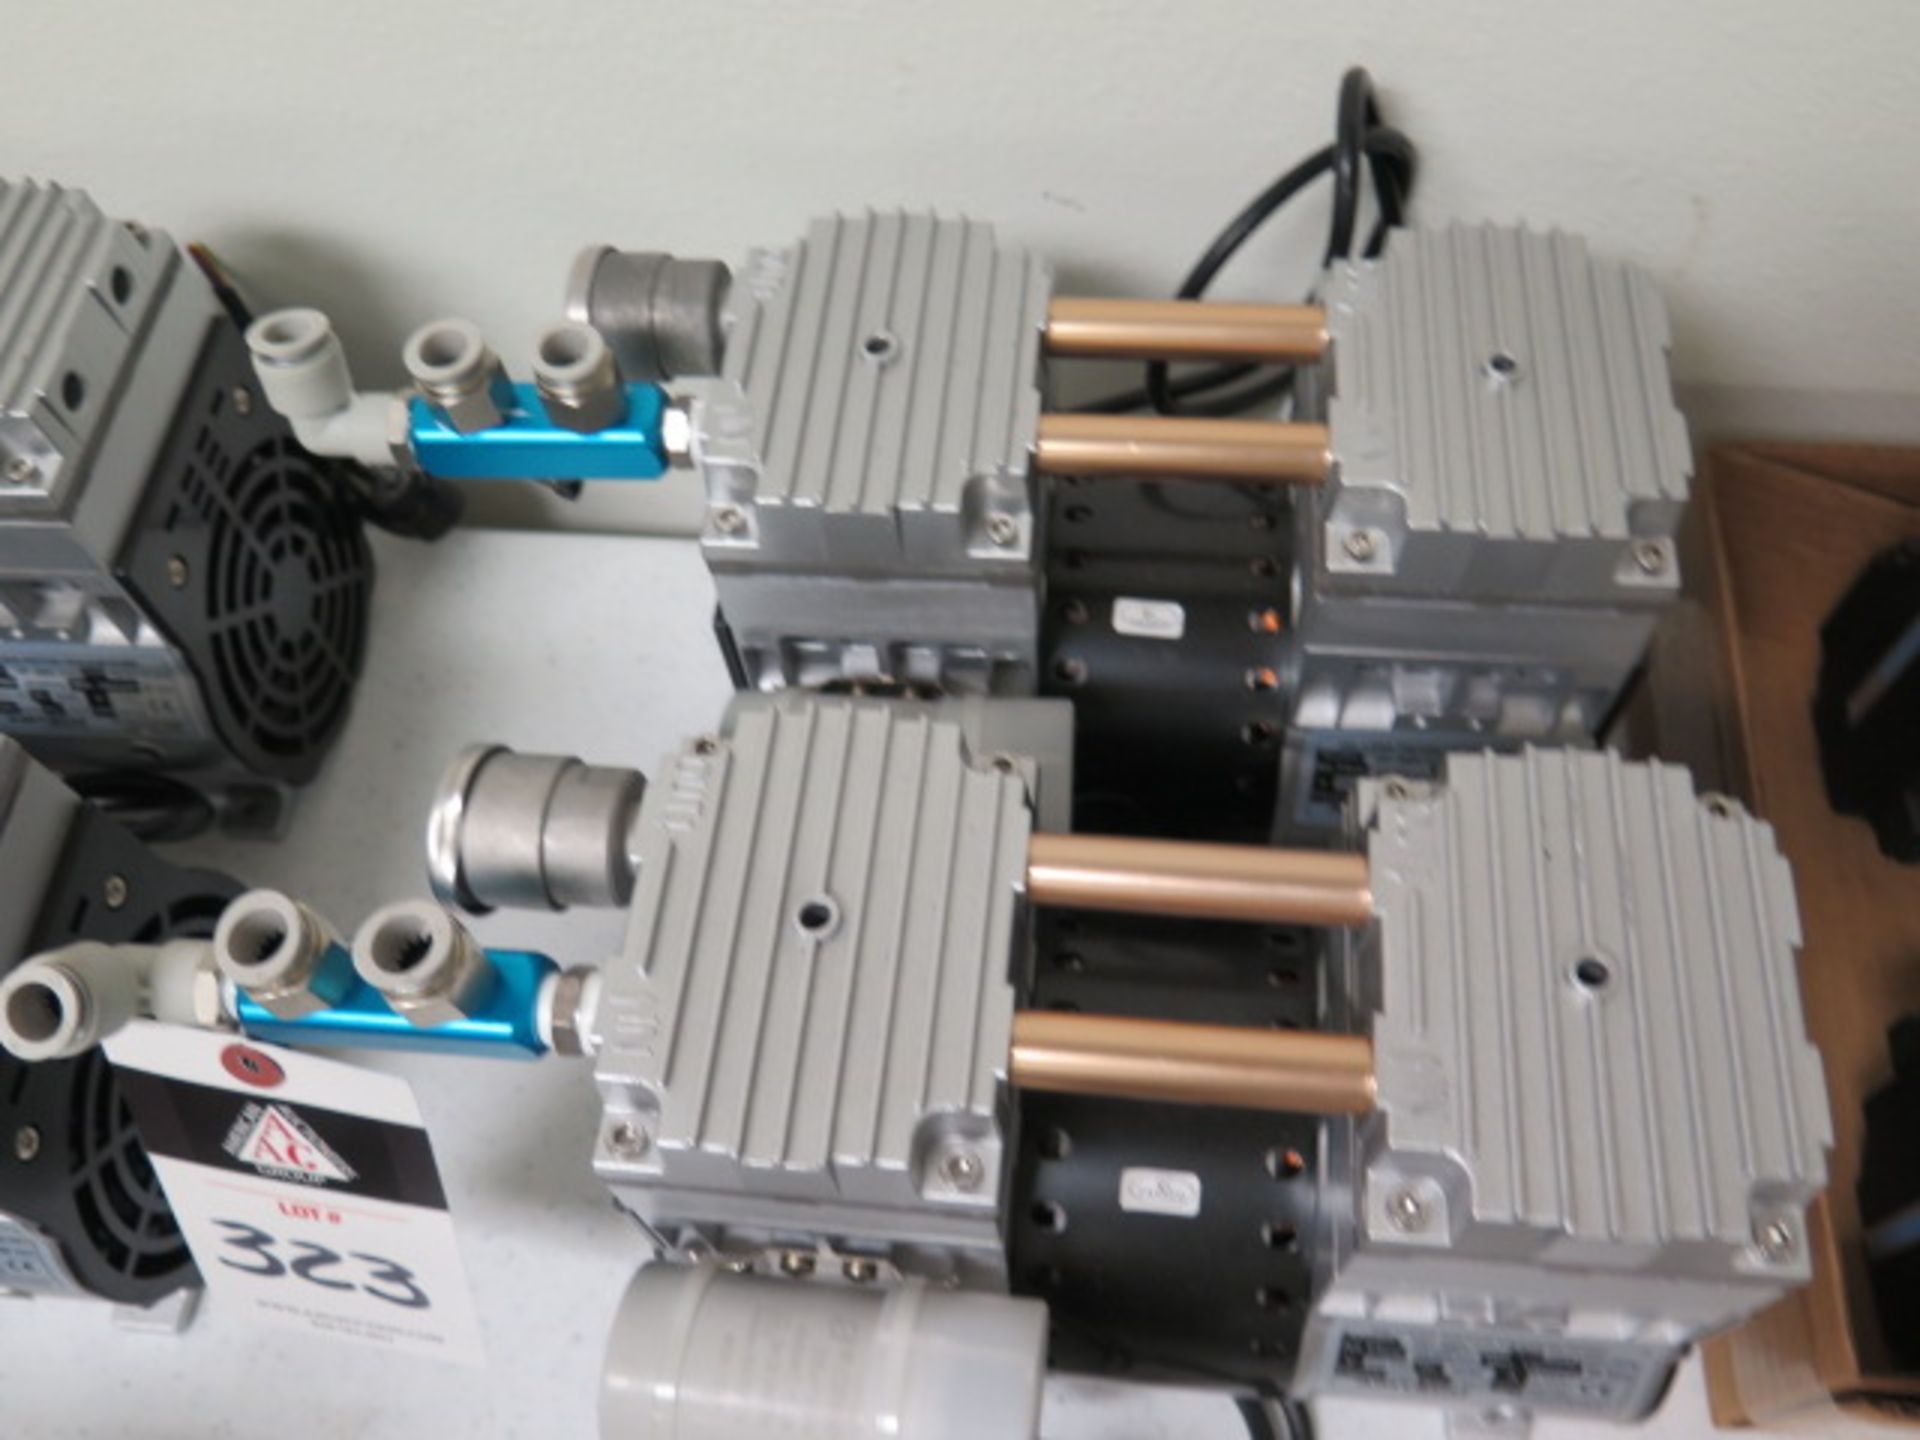 Airtech HP-200V 80 torr Vacuum Pumps (2) 200-240V (SOLD AS-IS - NO WARRANTY) - Image 3 of 4